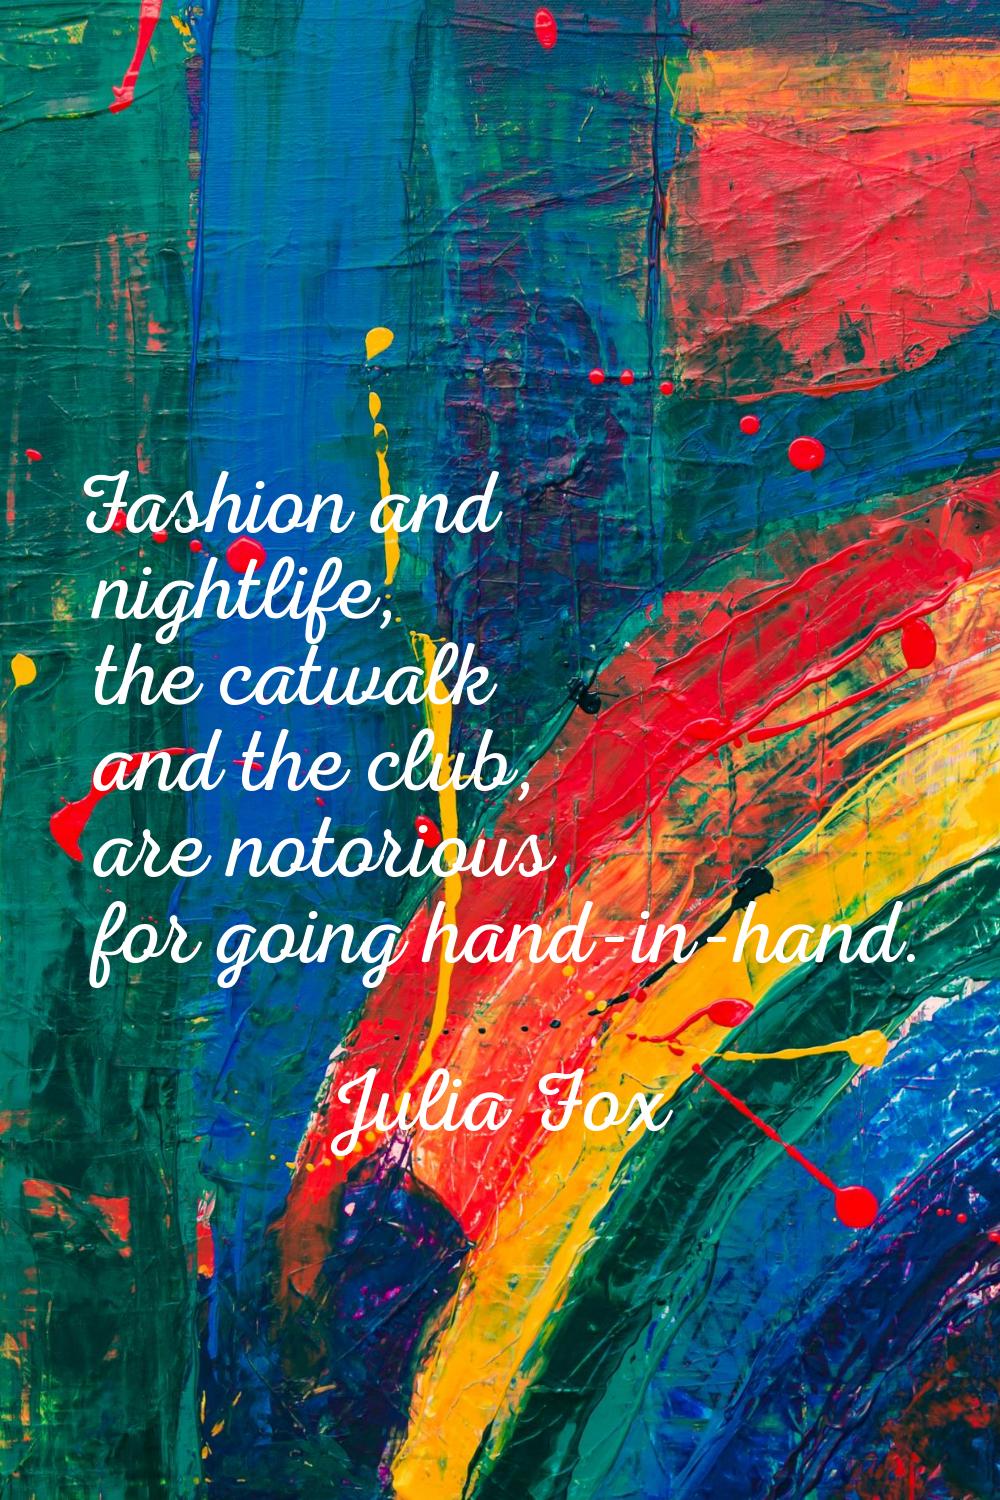 Fashion and nightlife, the catwalk and the club, are notorious for going hand-in-hand.